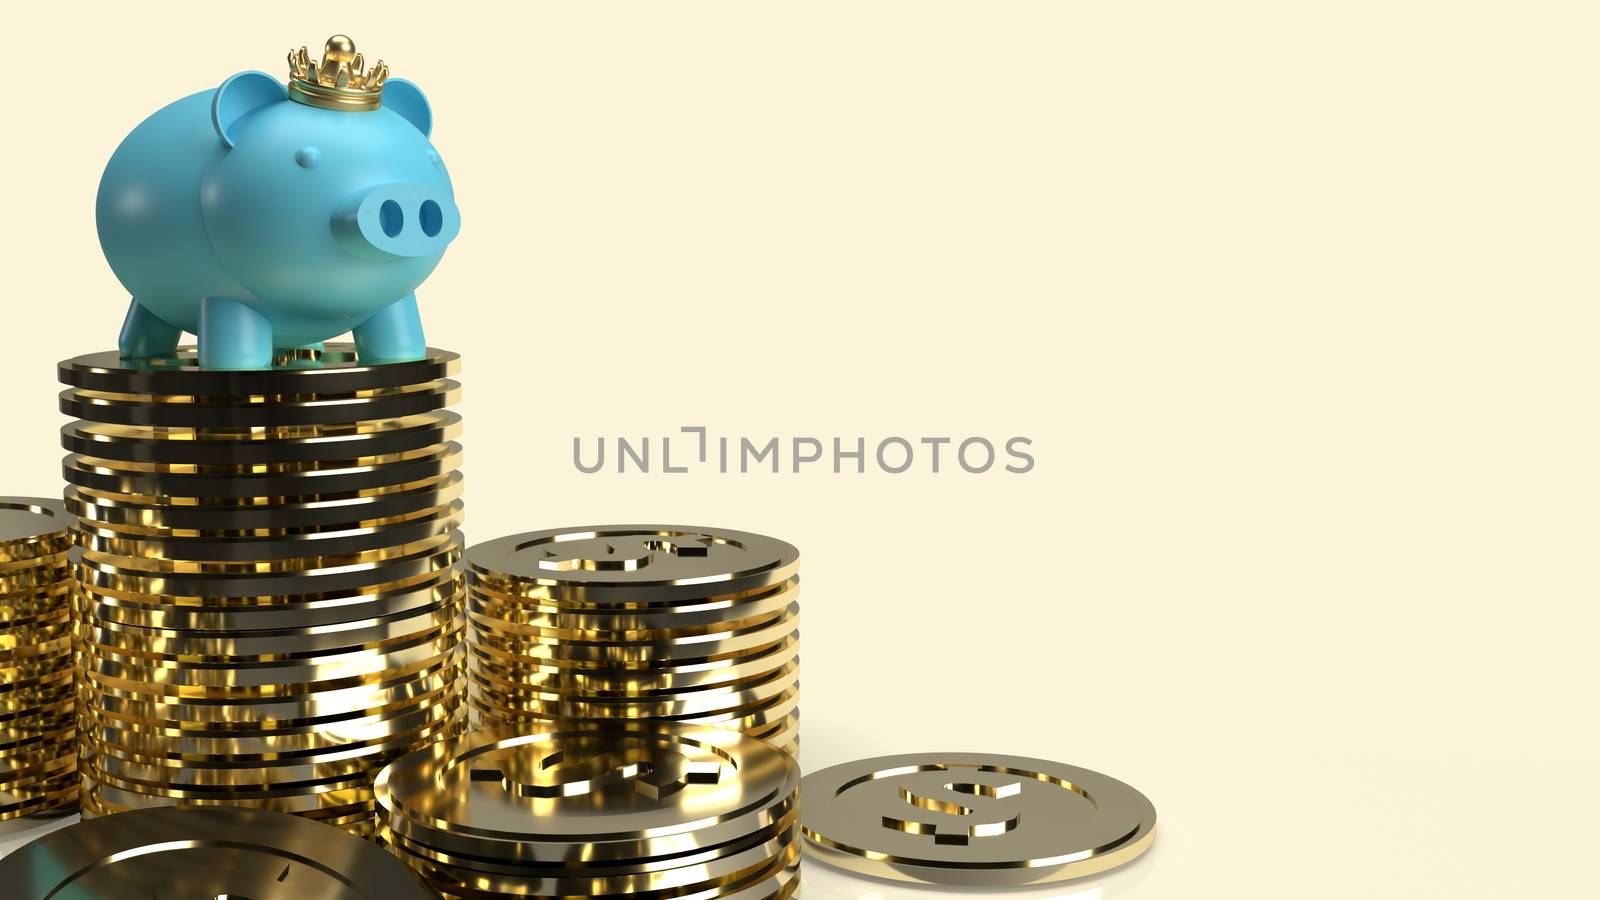 blue pig bank and crown on gold coins for business content 3d rendering.